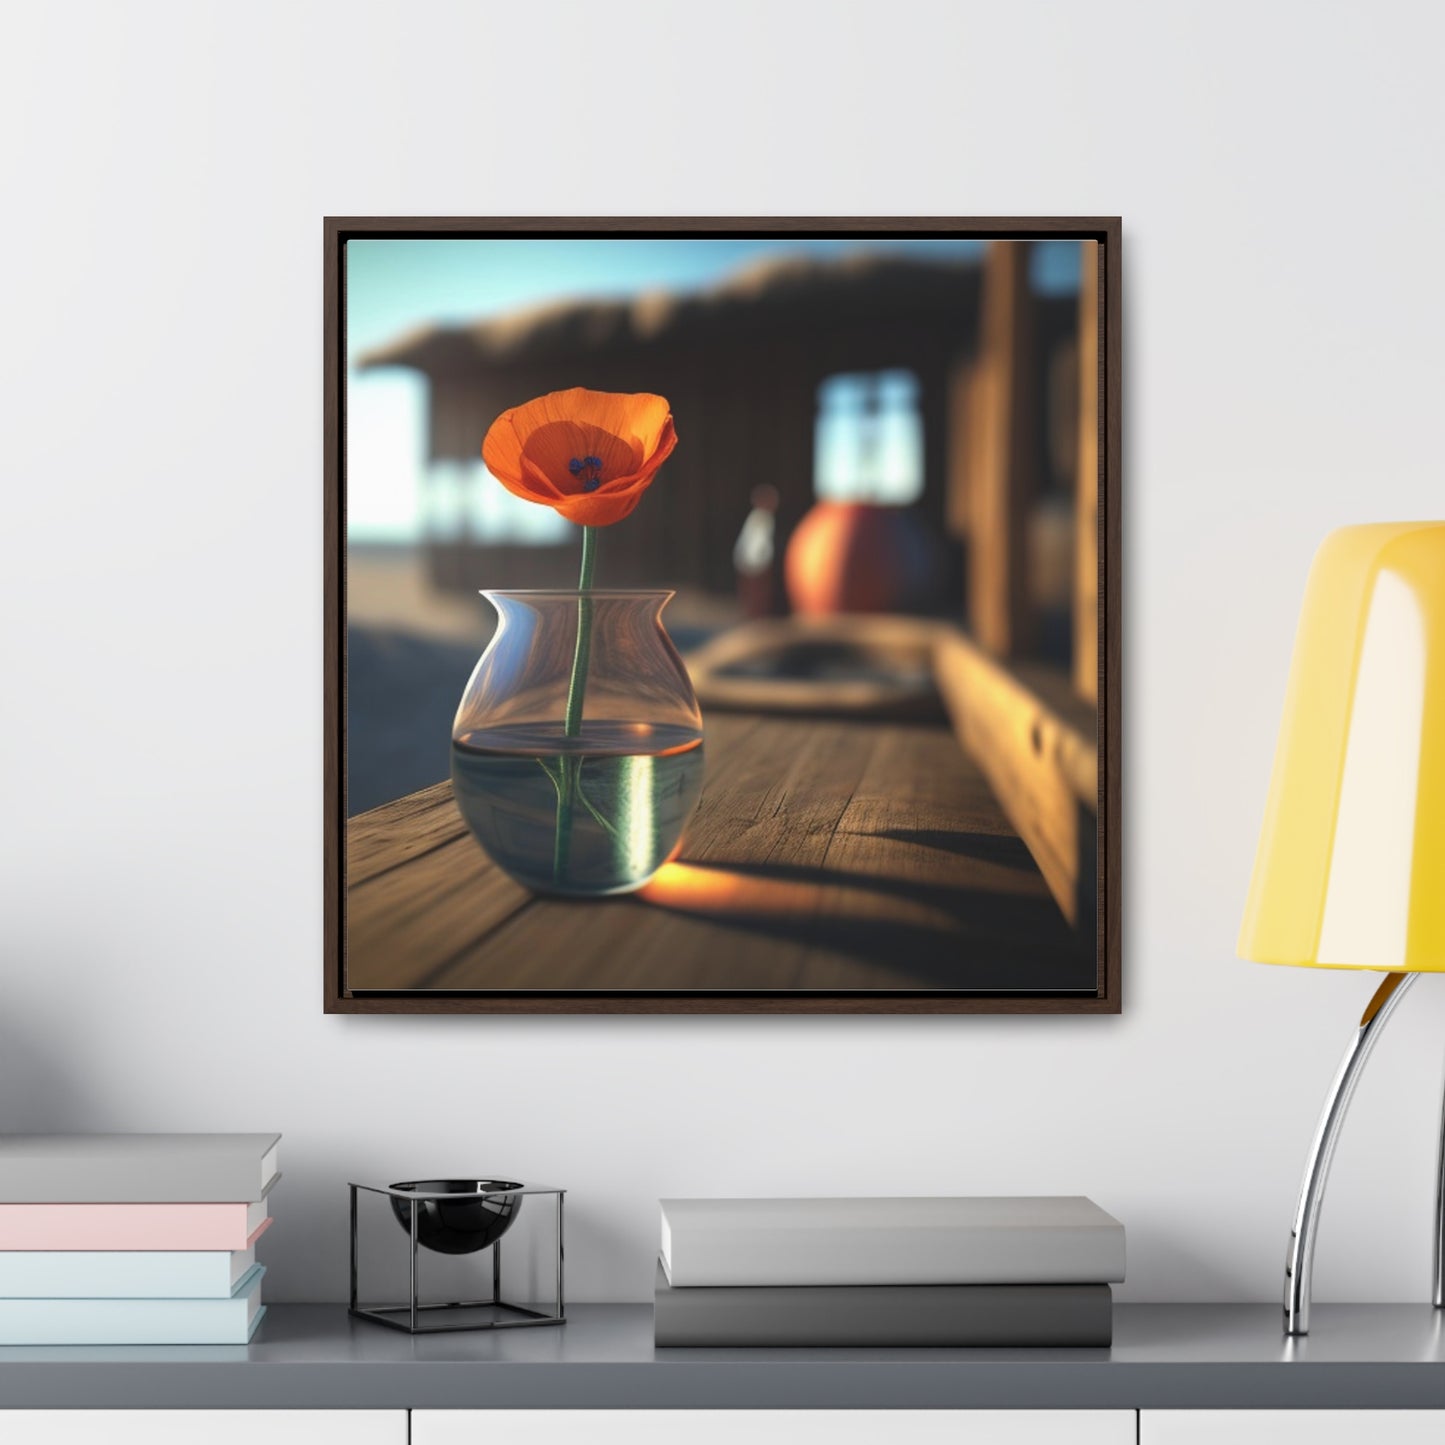 Gallery Canvas Wraps, Square Frame Poppy in a Glass Vase 2